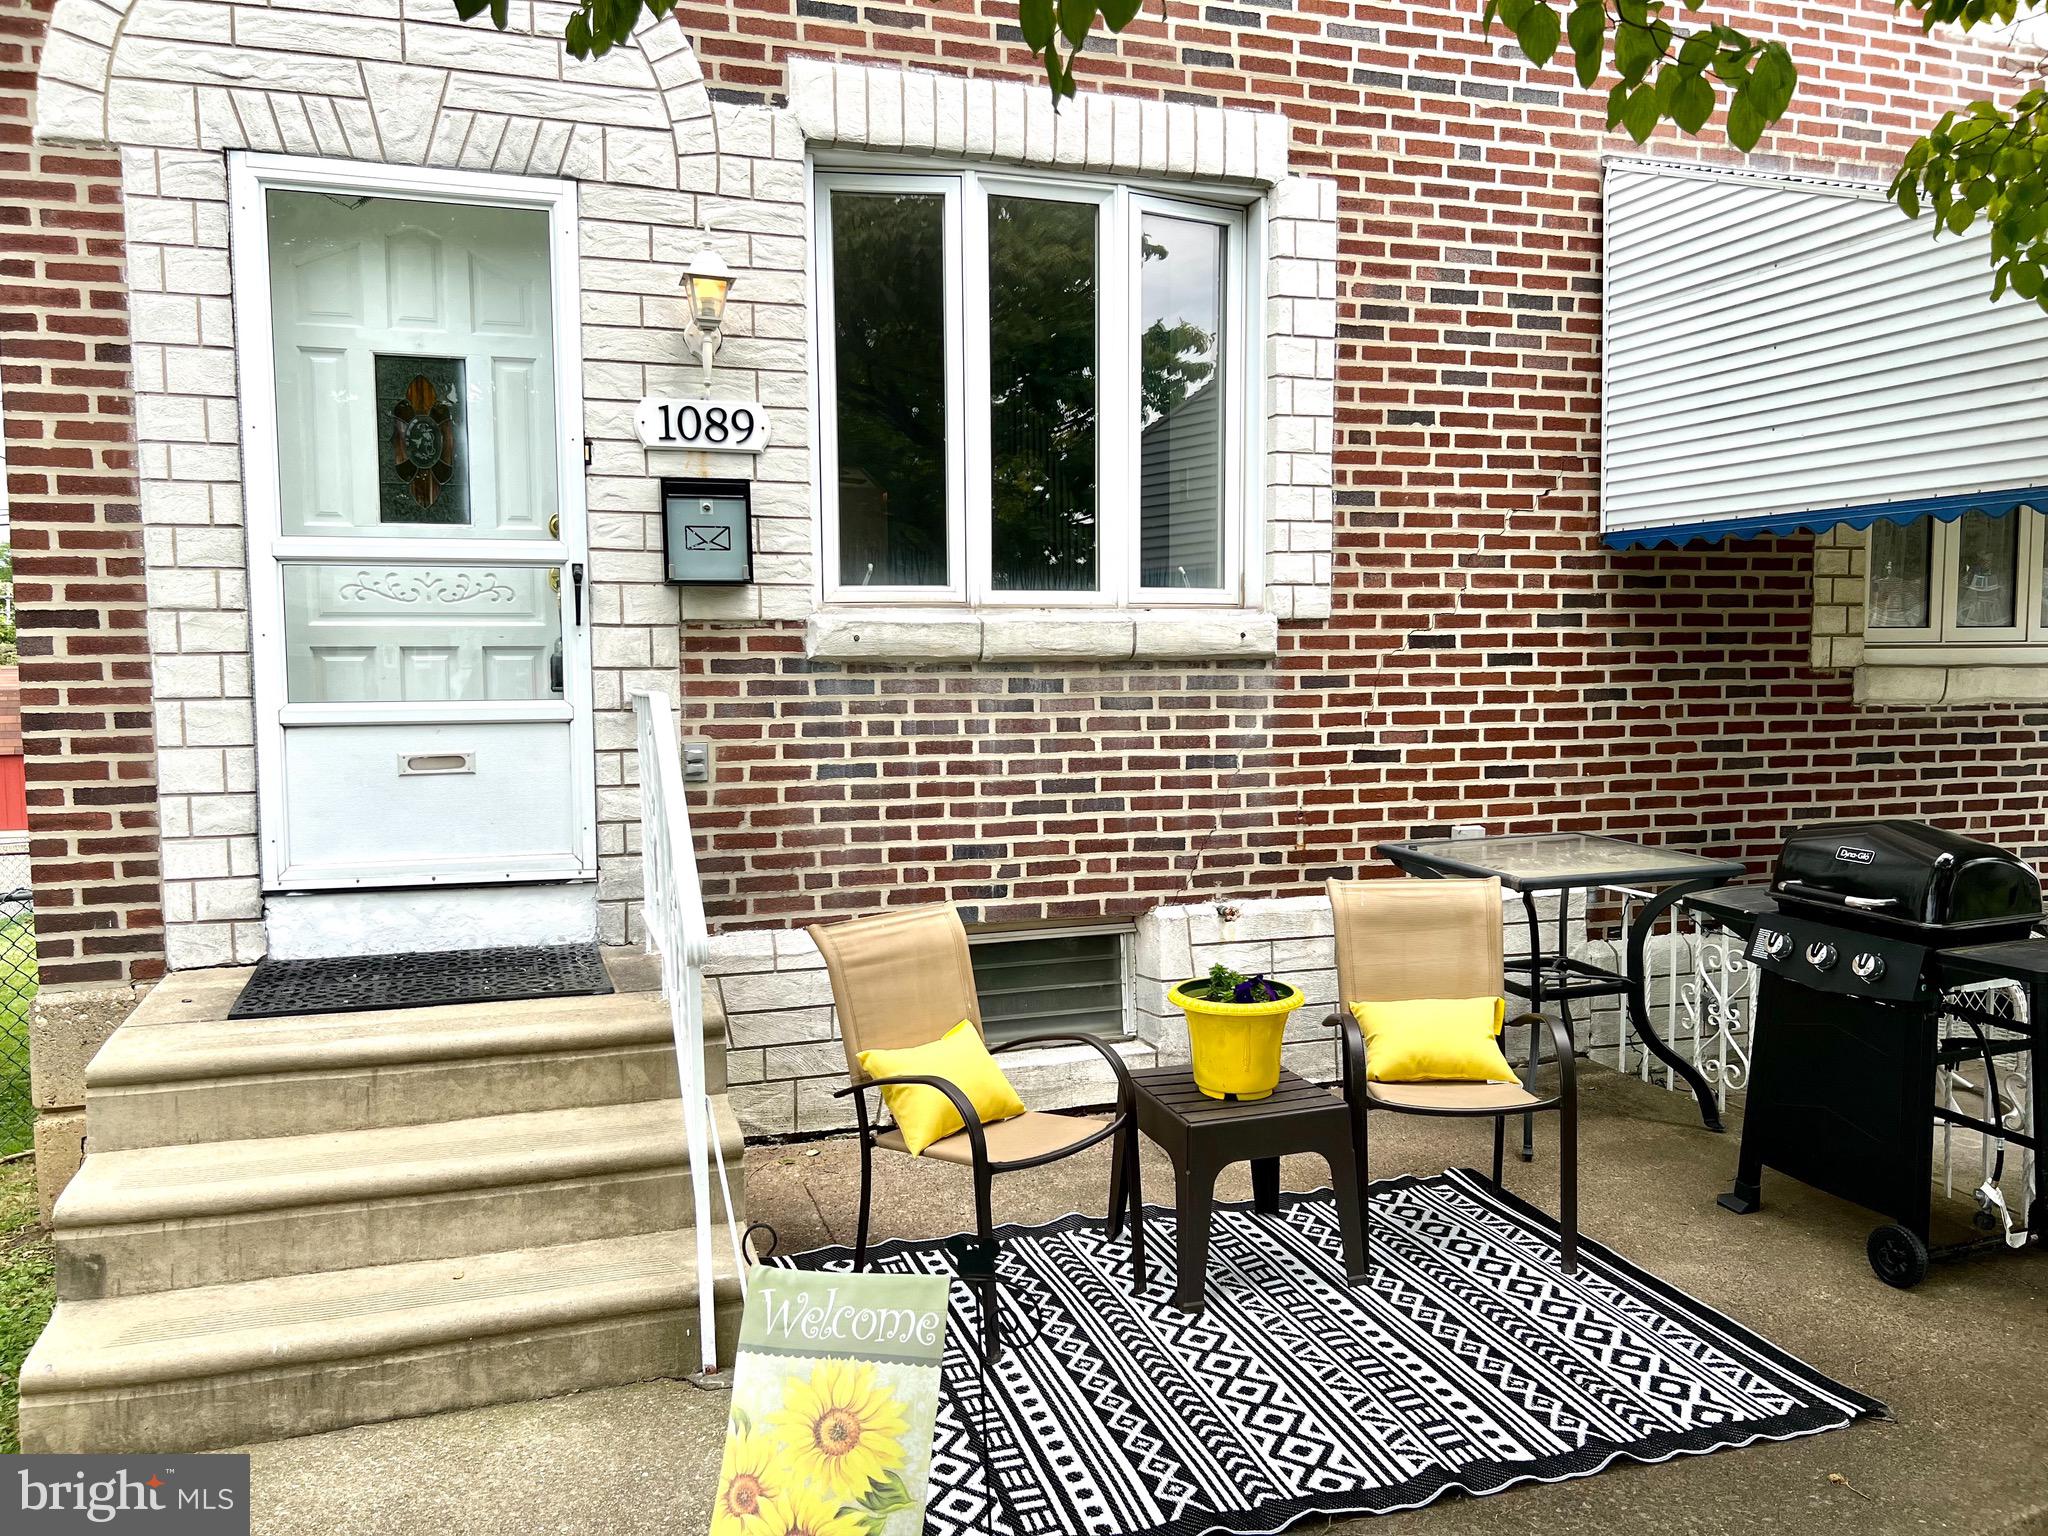 a view of a lounge chairs in the patio